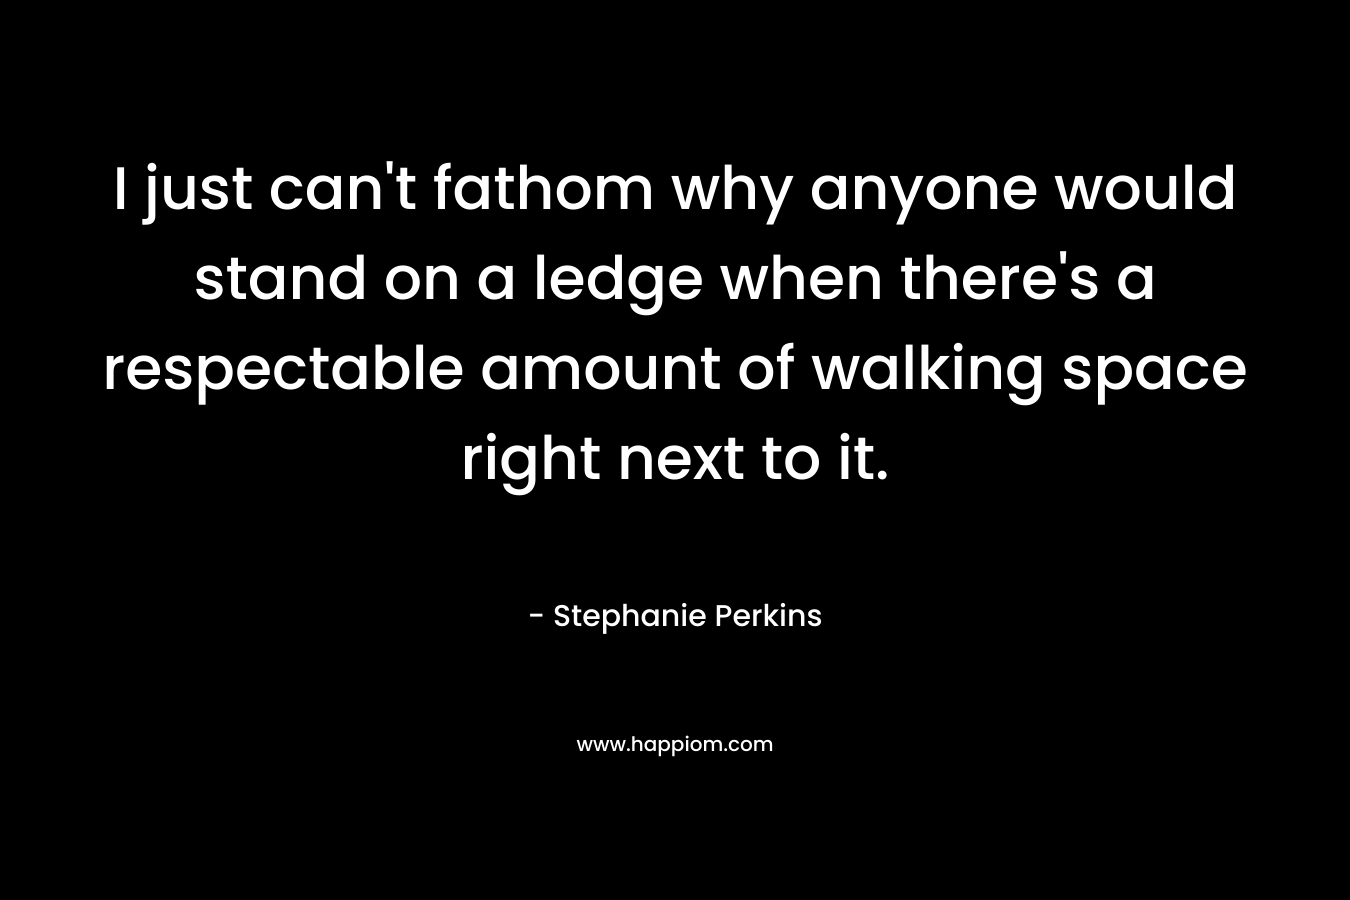 I just can’t fathom why anyone would stand on a ledge when there’s a respectable amount of walking space right next to it. – Stephanie Perkins